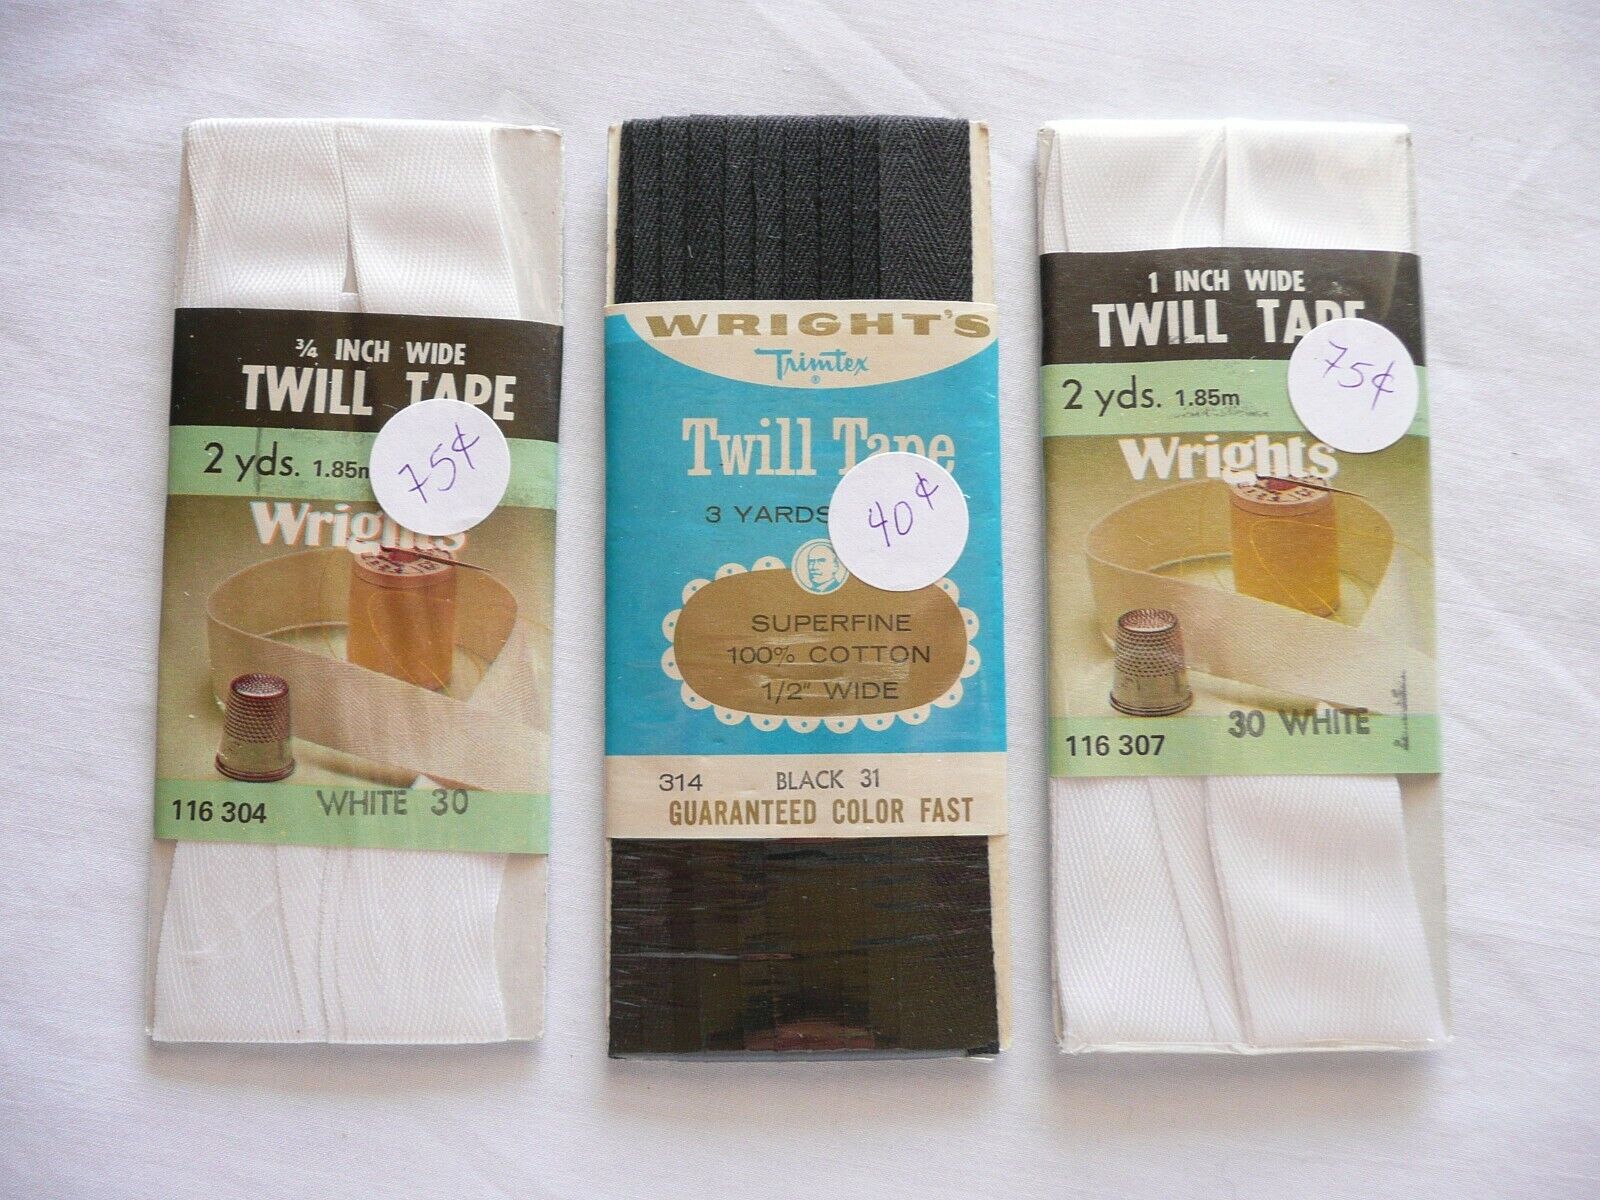 Lot of 3 Sewing Twill Tape * Wrights * White 30, Black 31